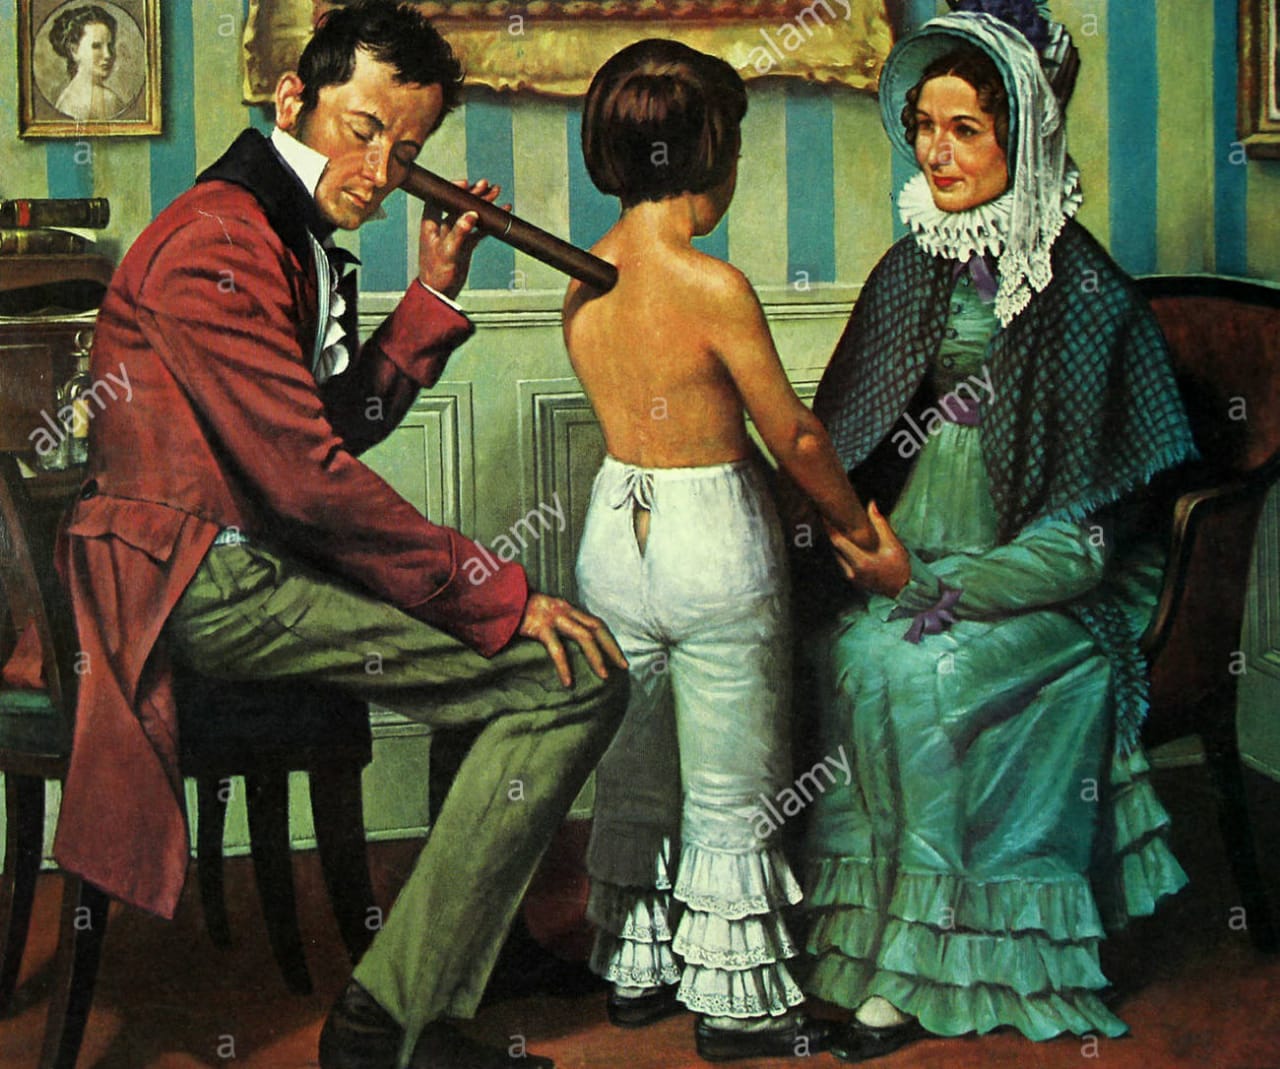 An illustration of a doctor examining patient by using monoaural stethoscope